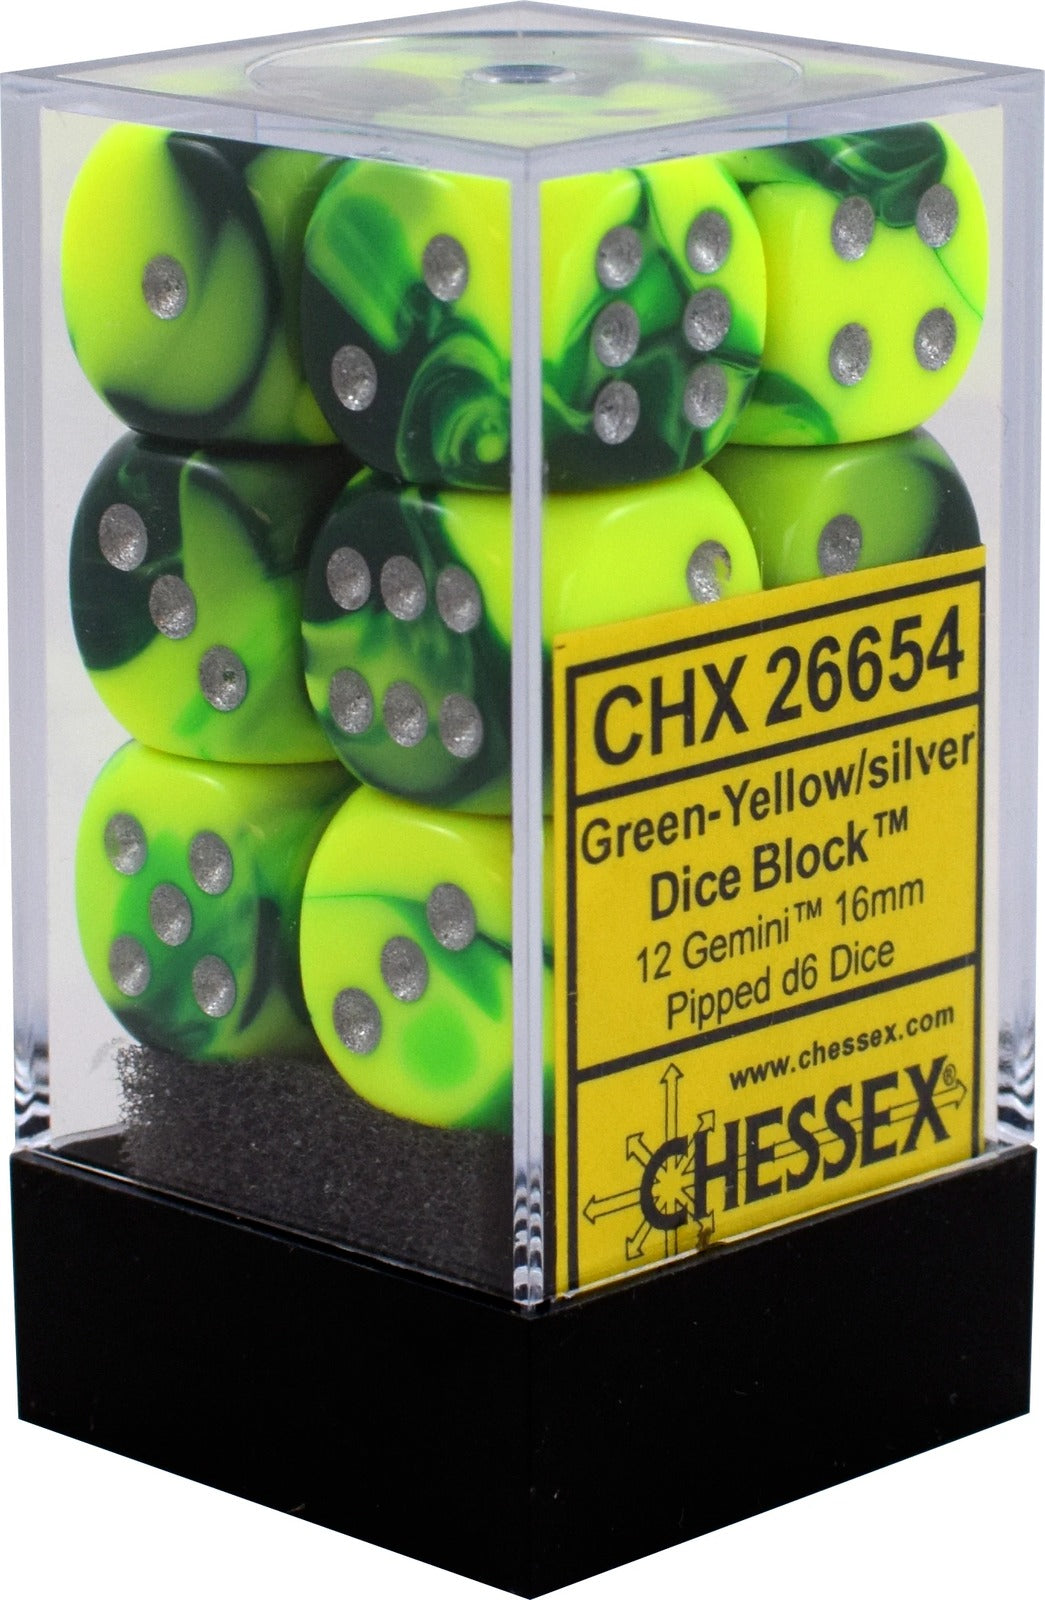 Chessex Gemini 16mm d6 with pips Dice Blocks (12 Dice) - Green-Yellow w/silver კამათელი